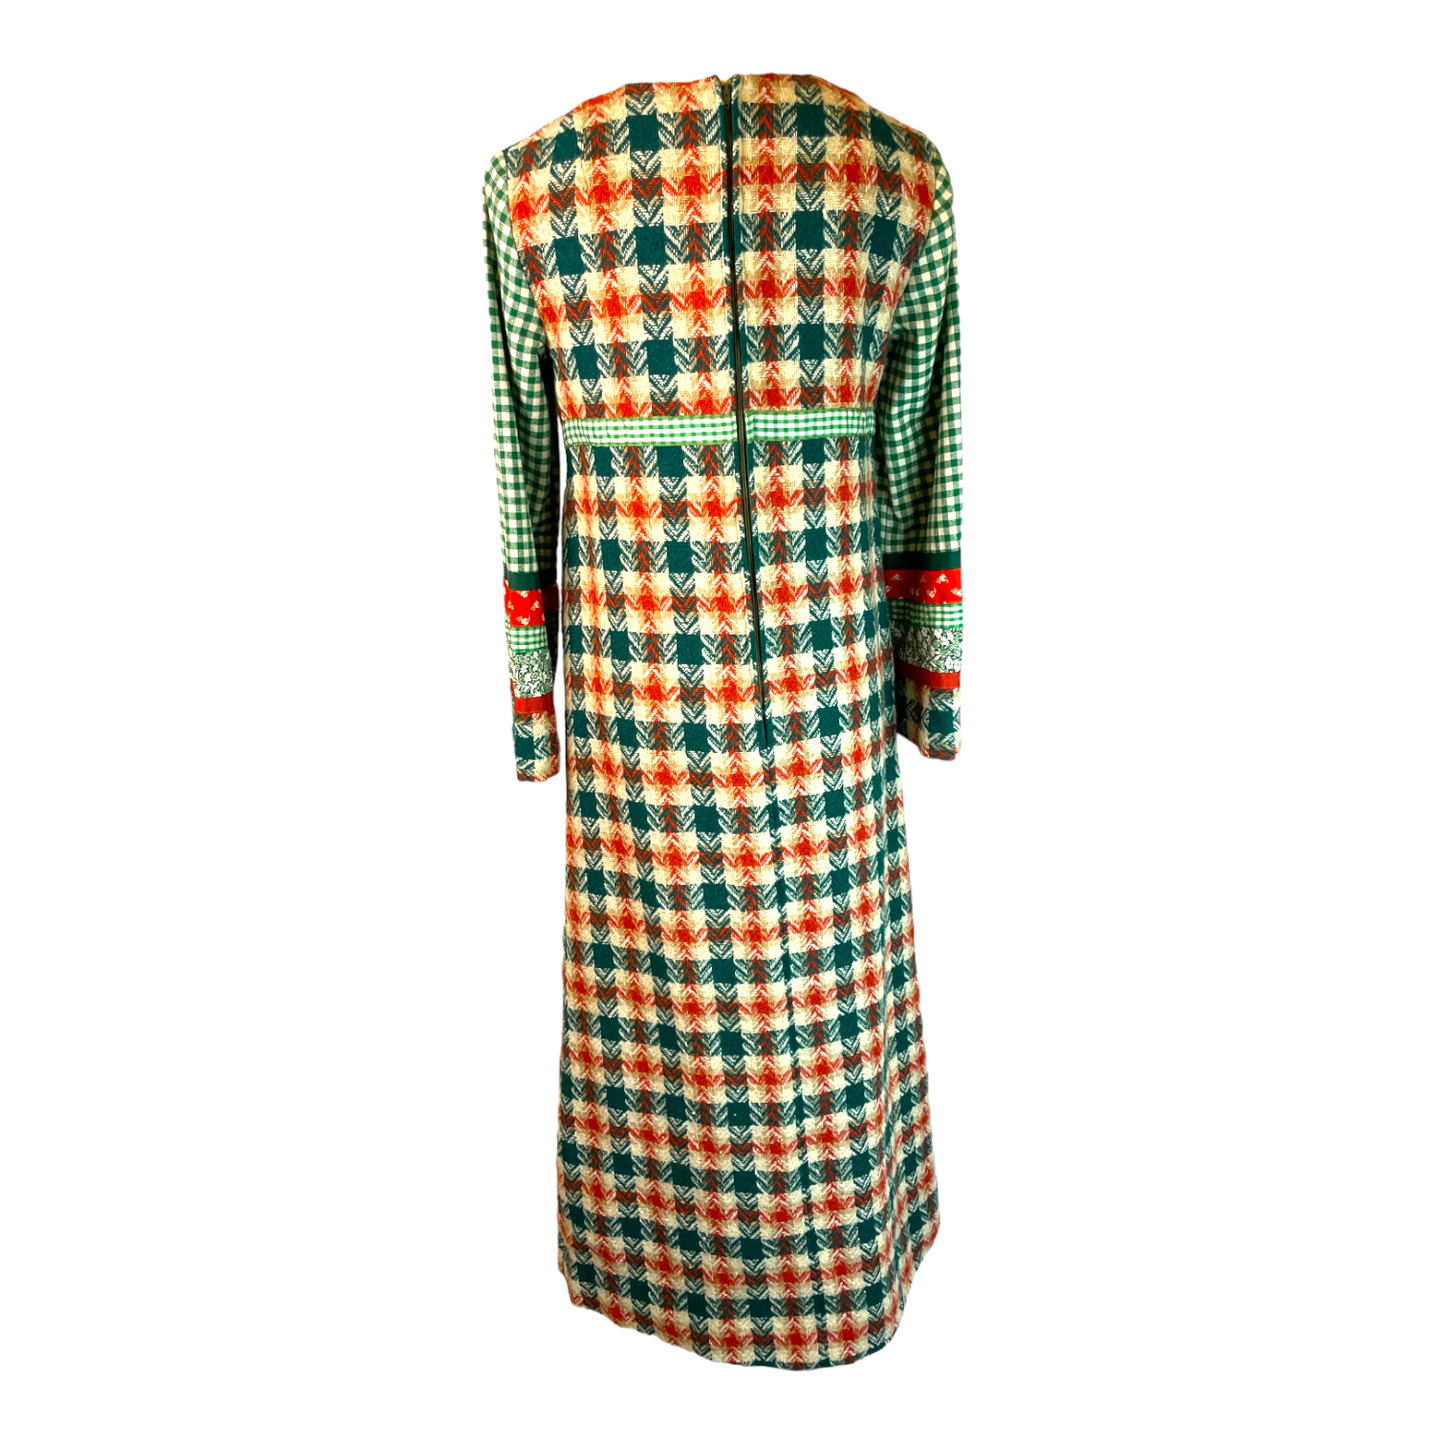 1970s Green and Orange Gingham and Tweed Dress